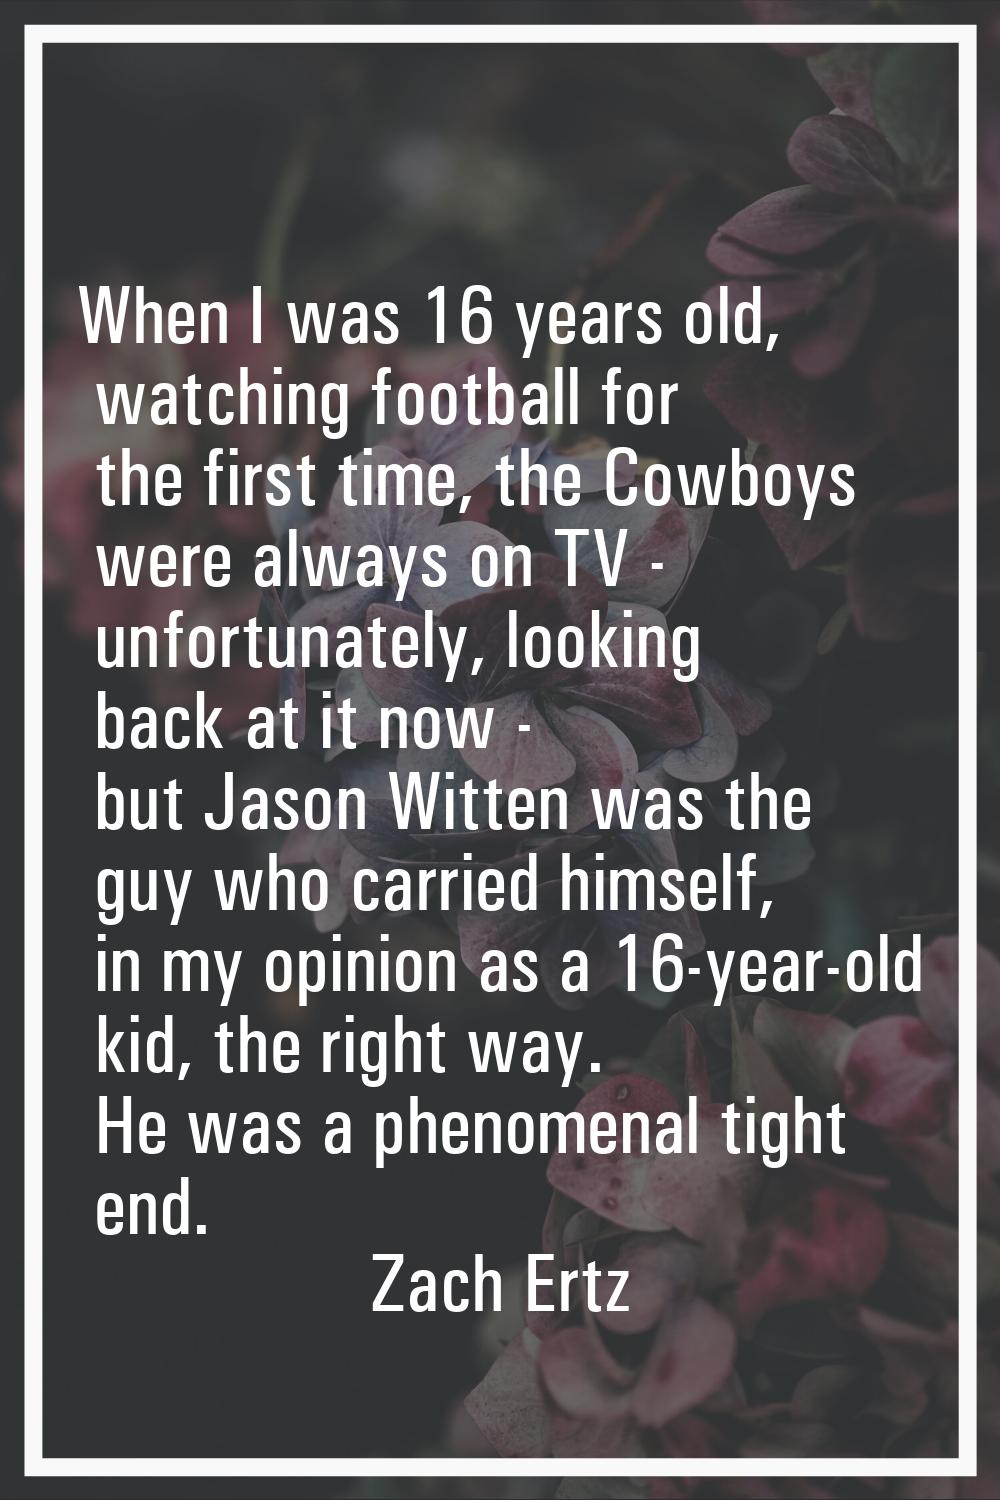 When I was 16 years old, watching football for the first time, the Cowboys were always on TV - unfo